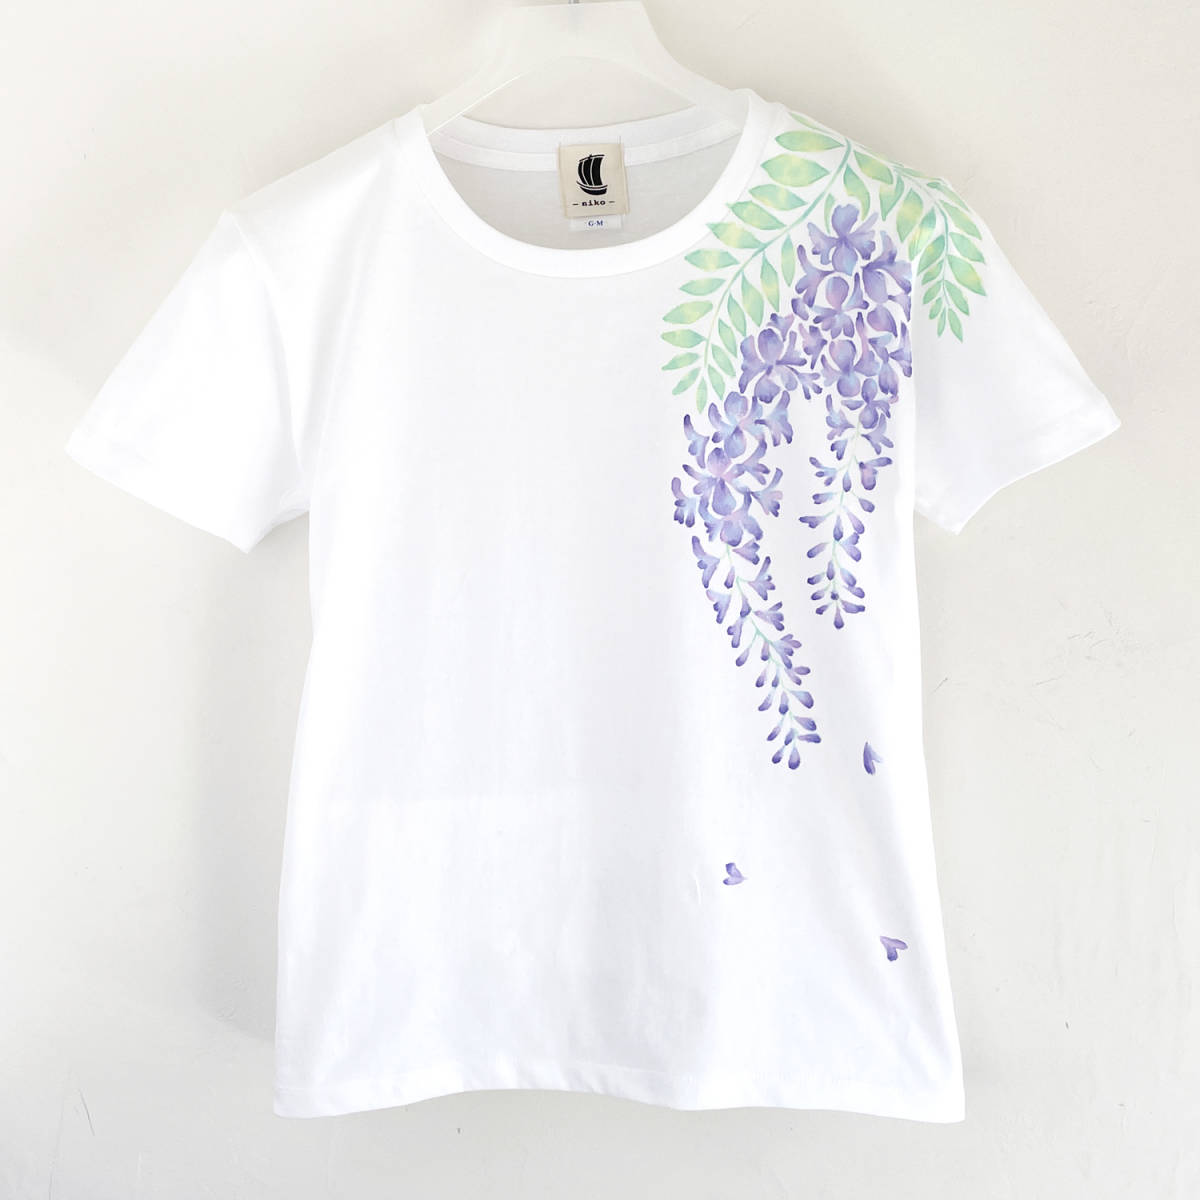 Women's T-shirt M size white wisteria flower pattern T-shirt handmade hand-painted T-shirt, M size, round neck, patterned